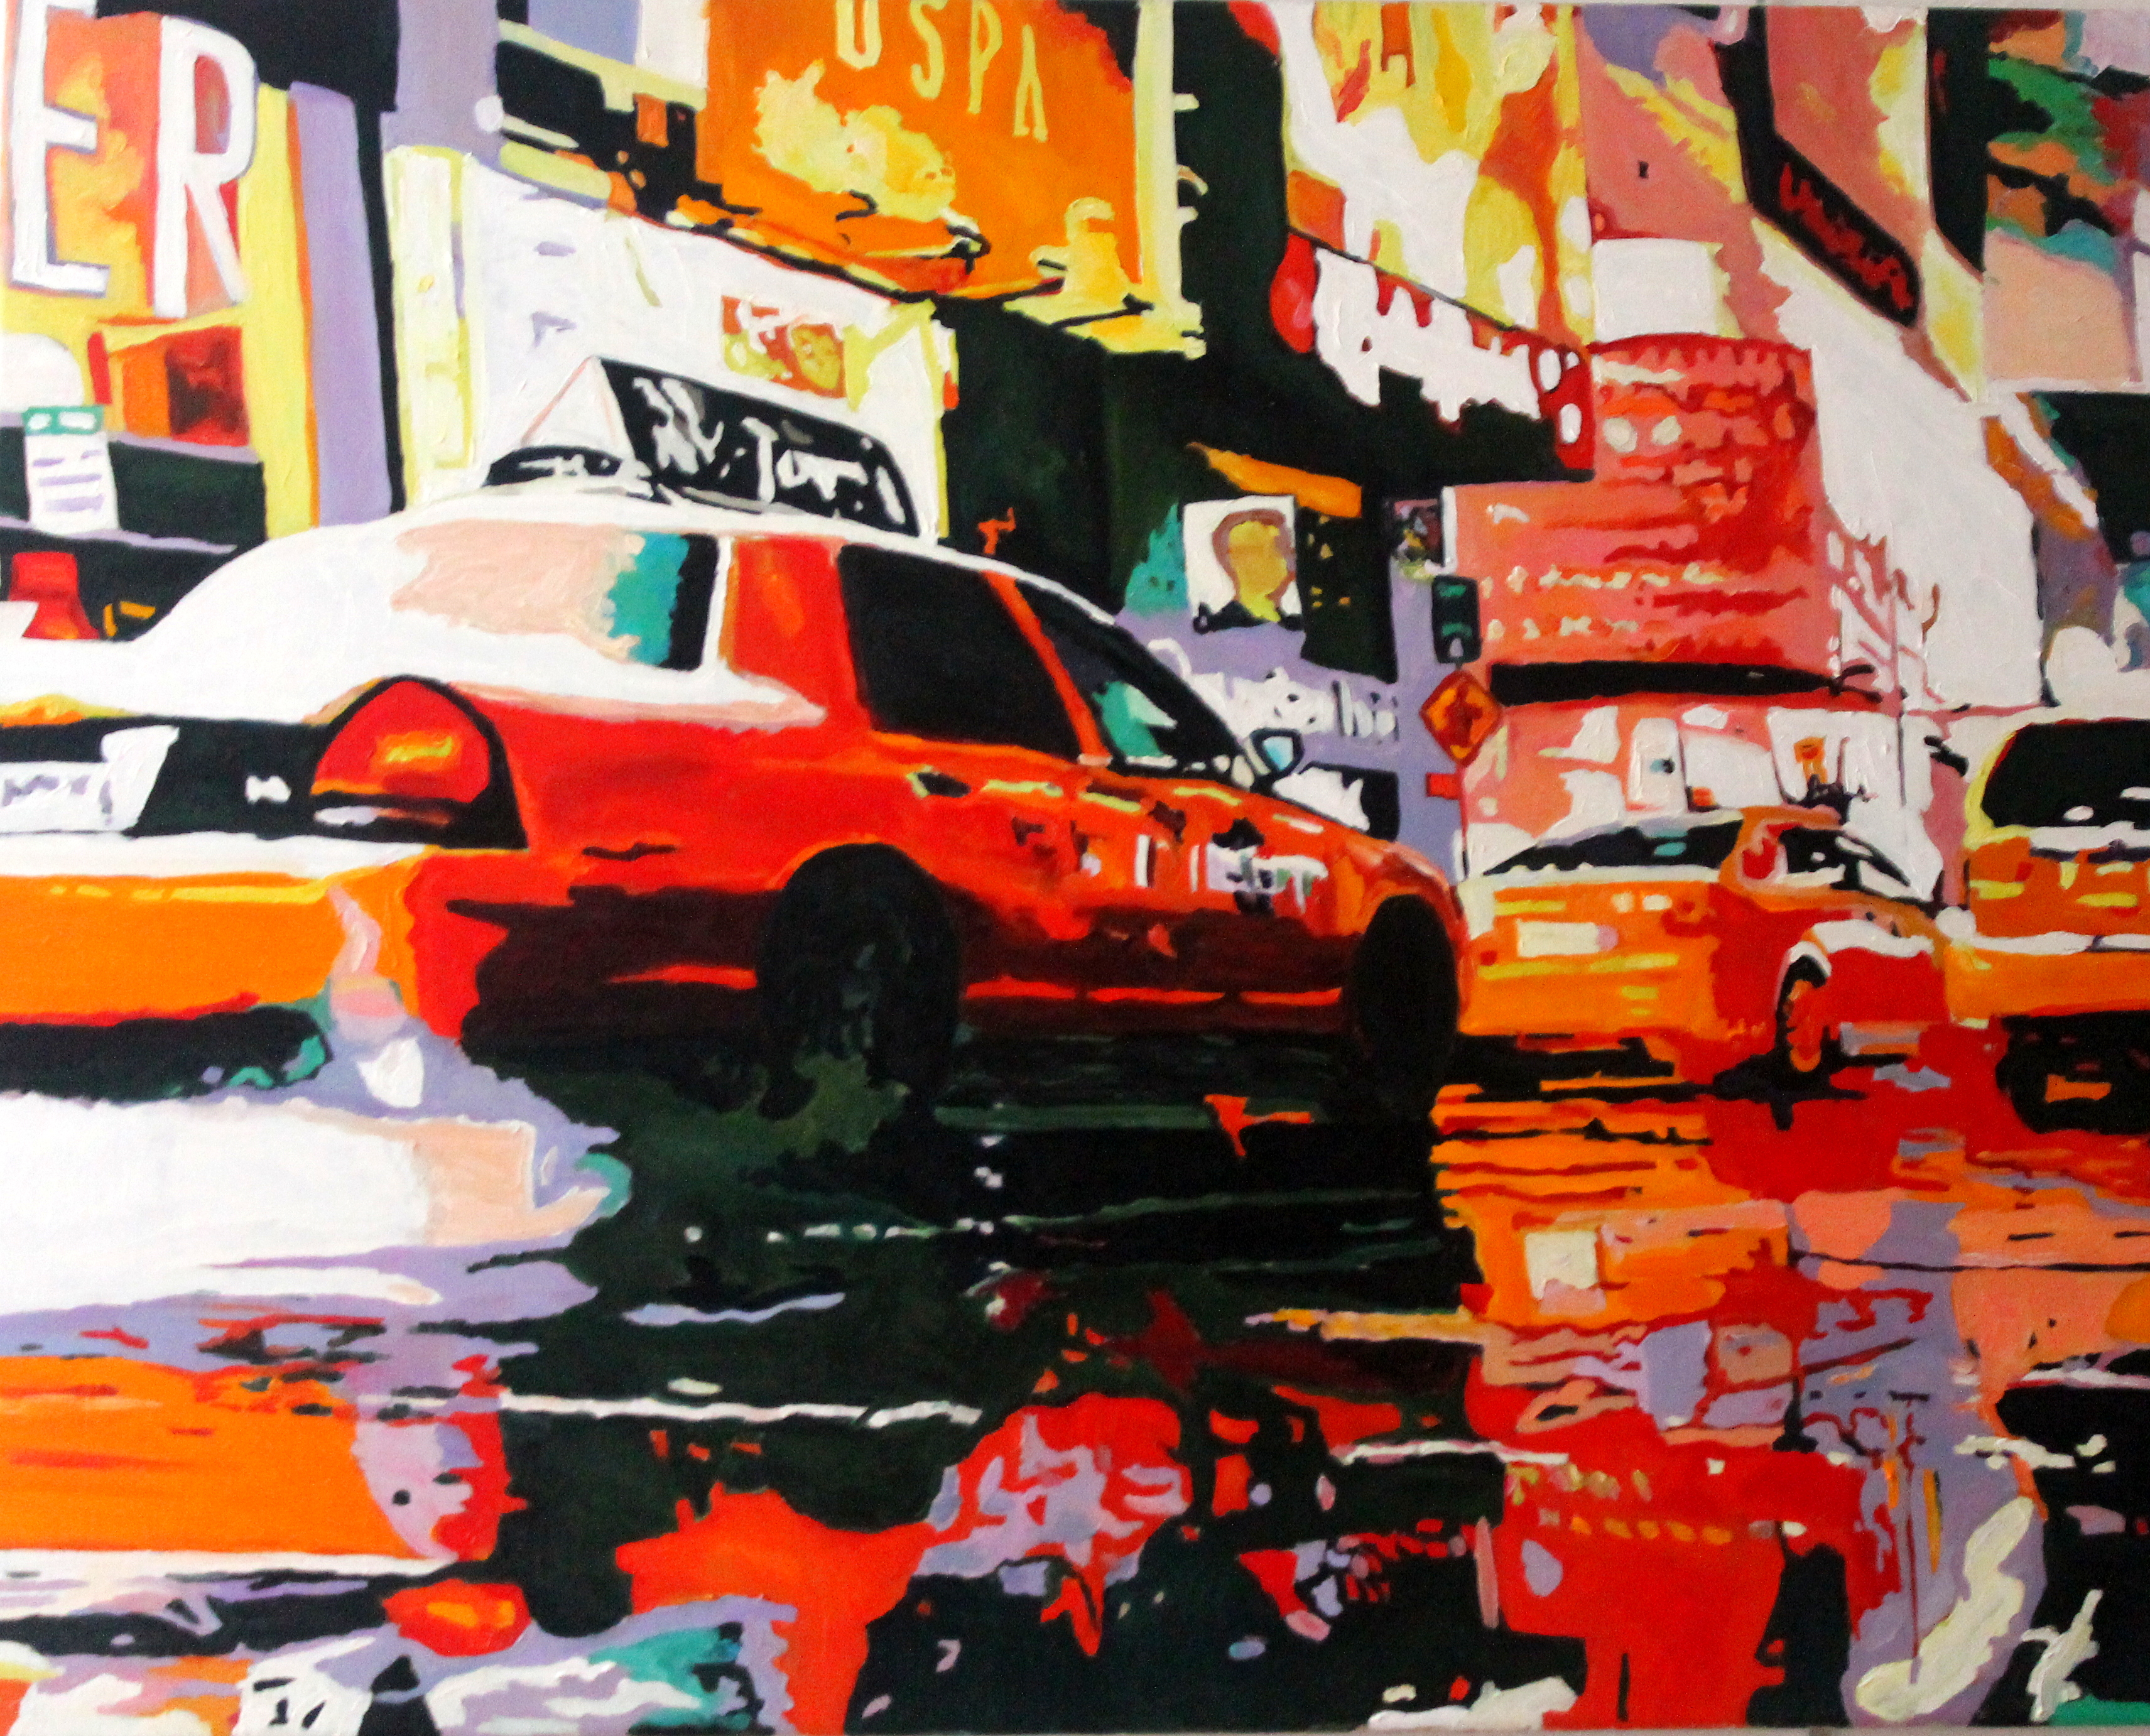 New York Painting by Emma Cownie